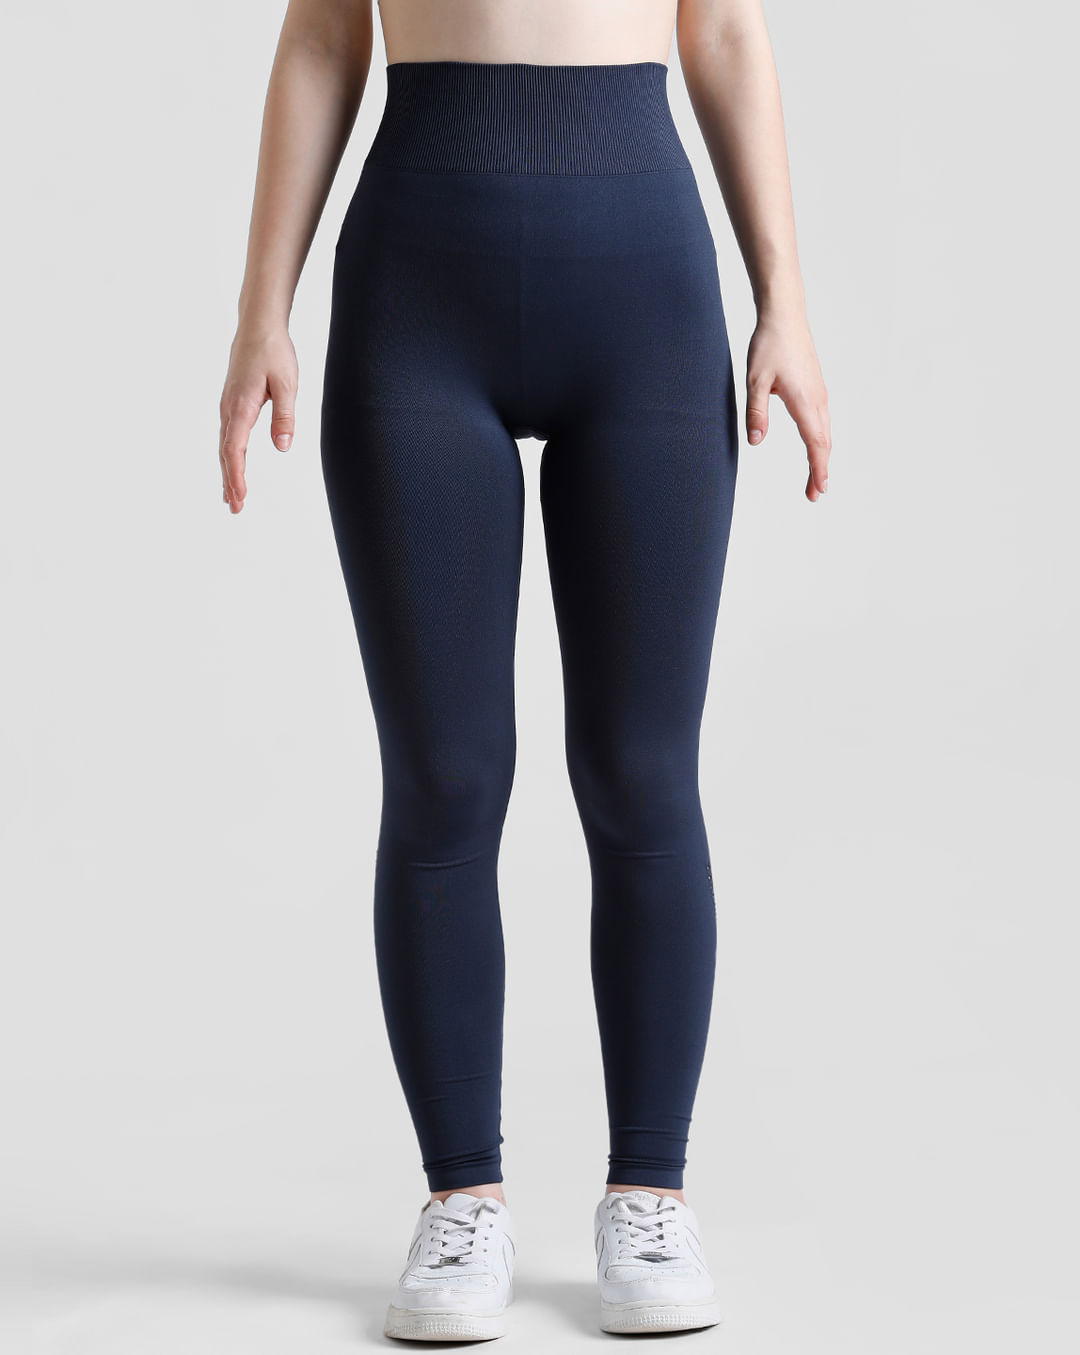 PLAY Navy Blue High Rise Seamless Training Tights